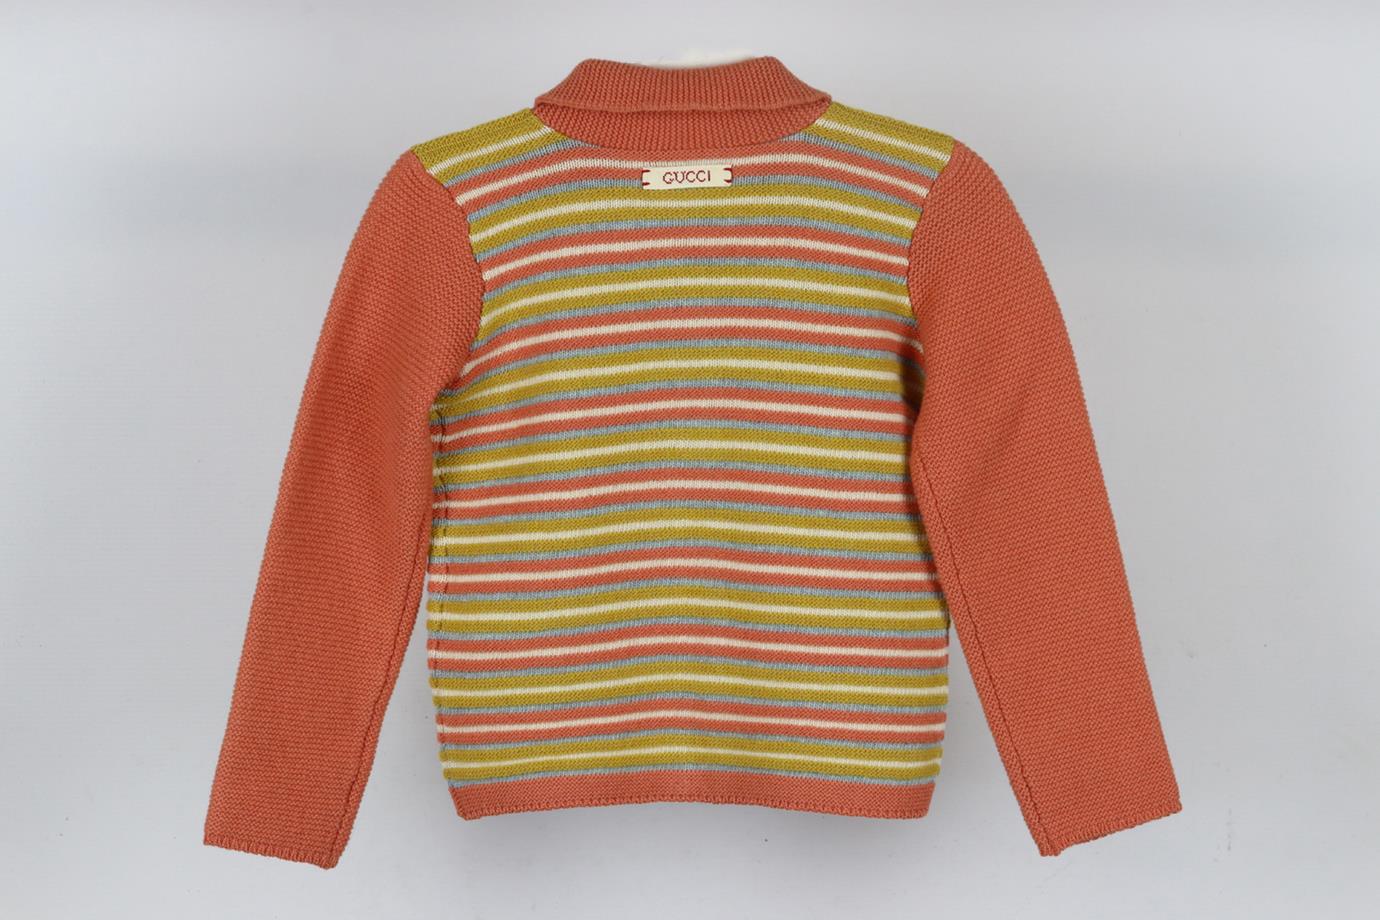 GUCCI KIDS UNISEX KNITTED CARDIGAN 36 MONTHS